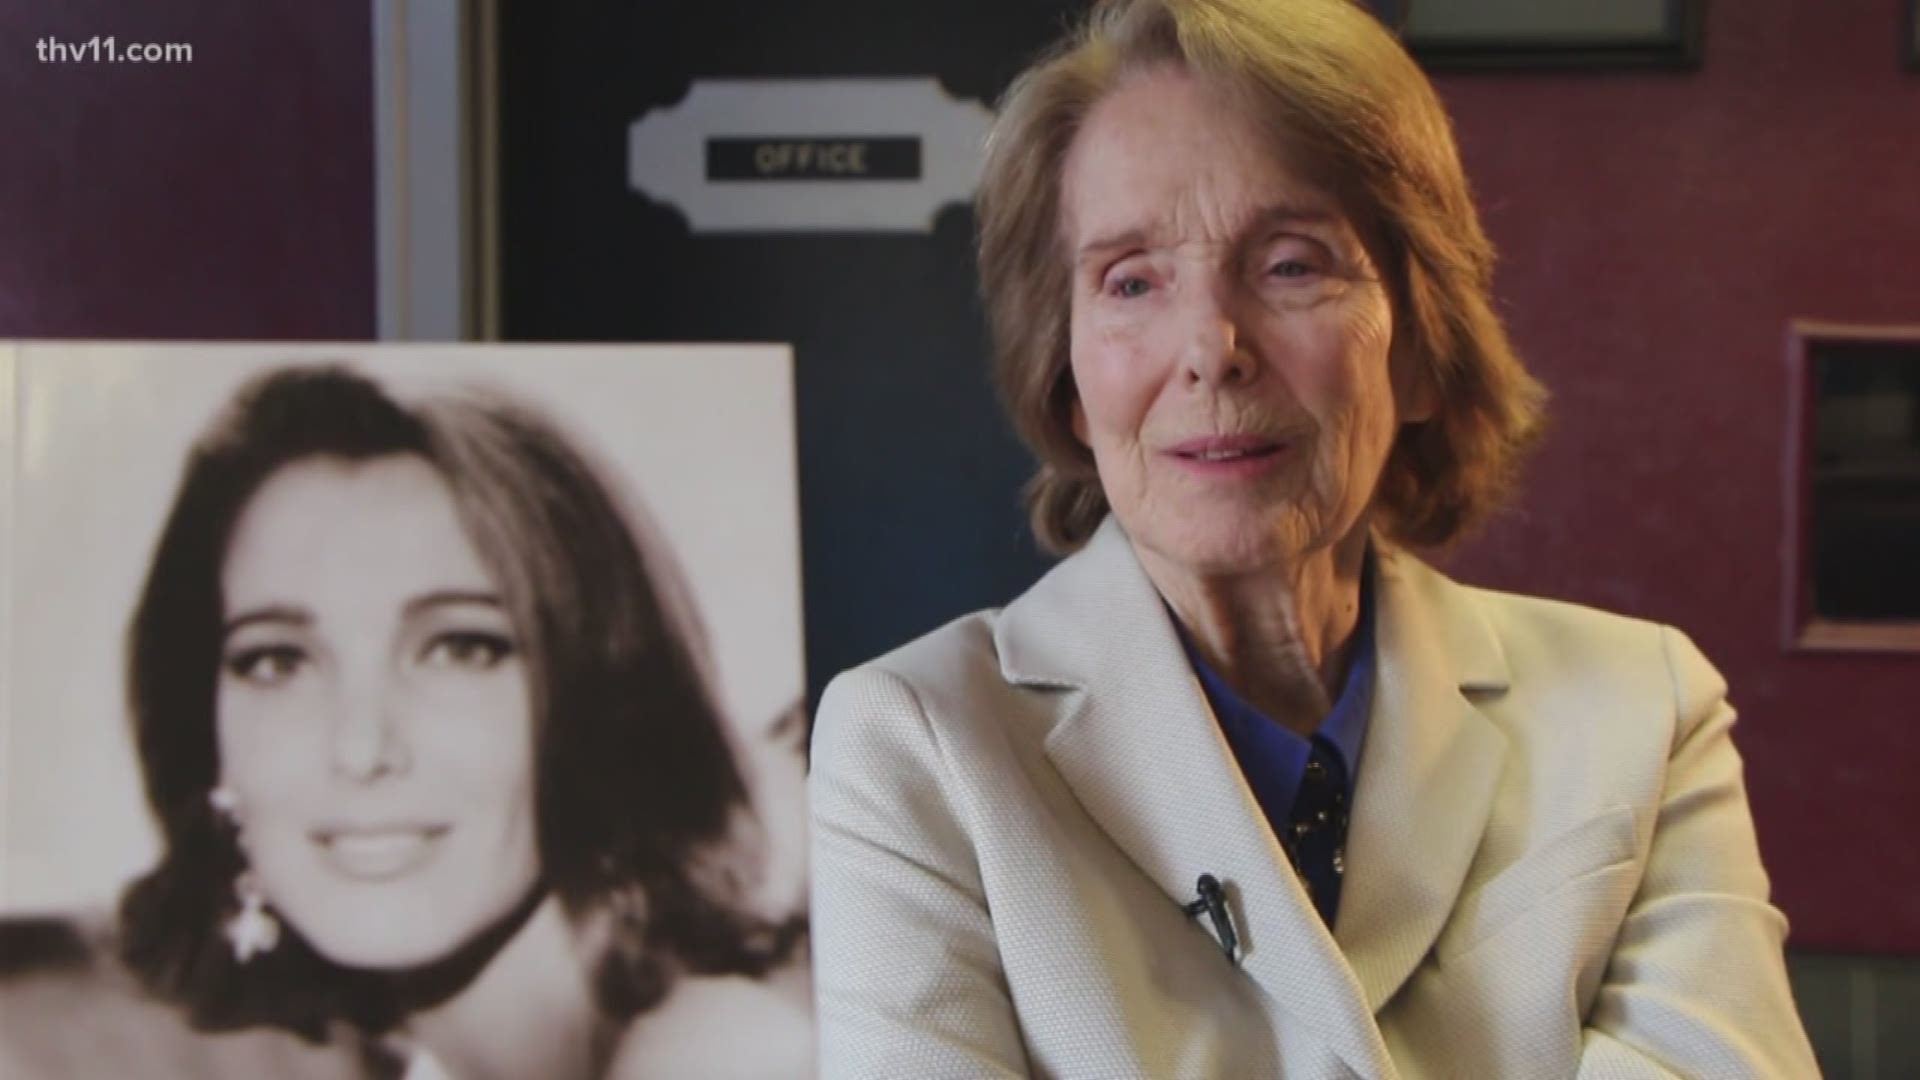 According to her son, Arkansas-native actress Julie Adams has died, at her Los Angeles home.